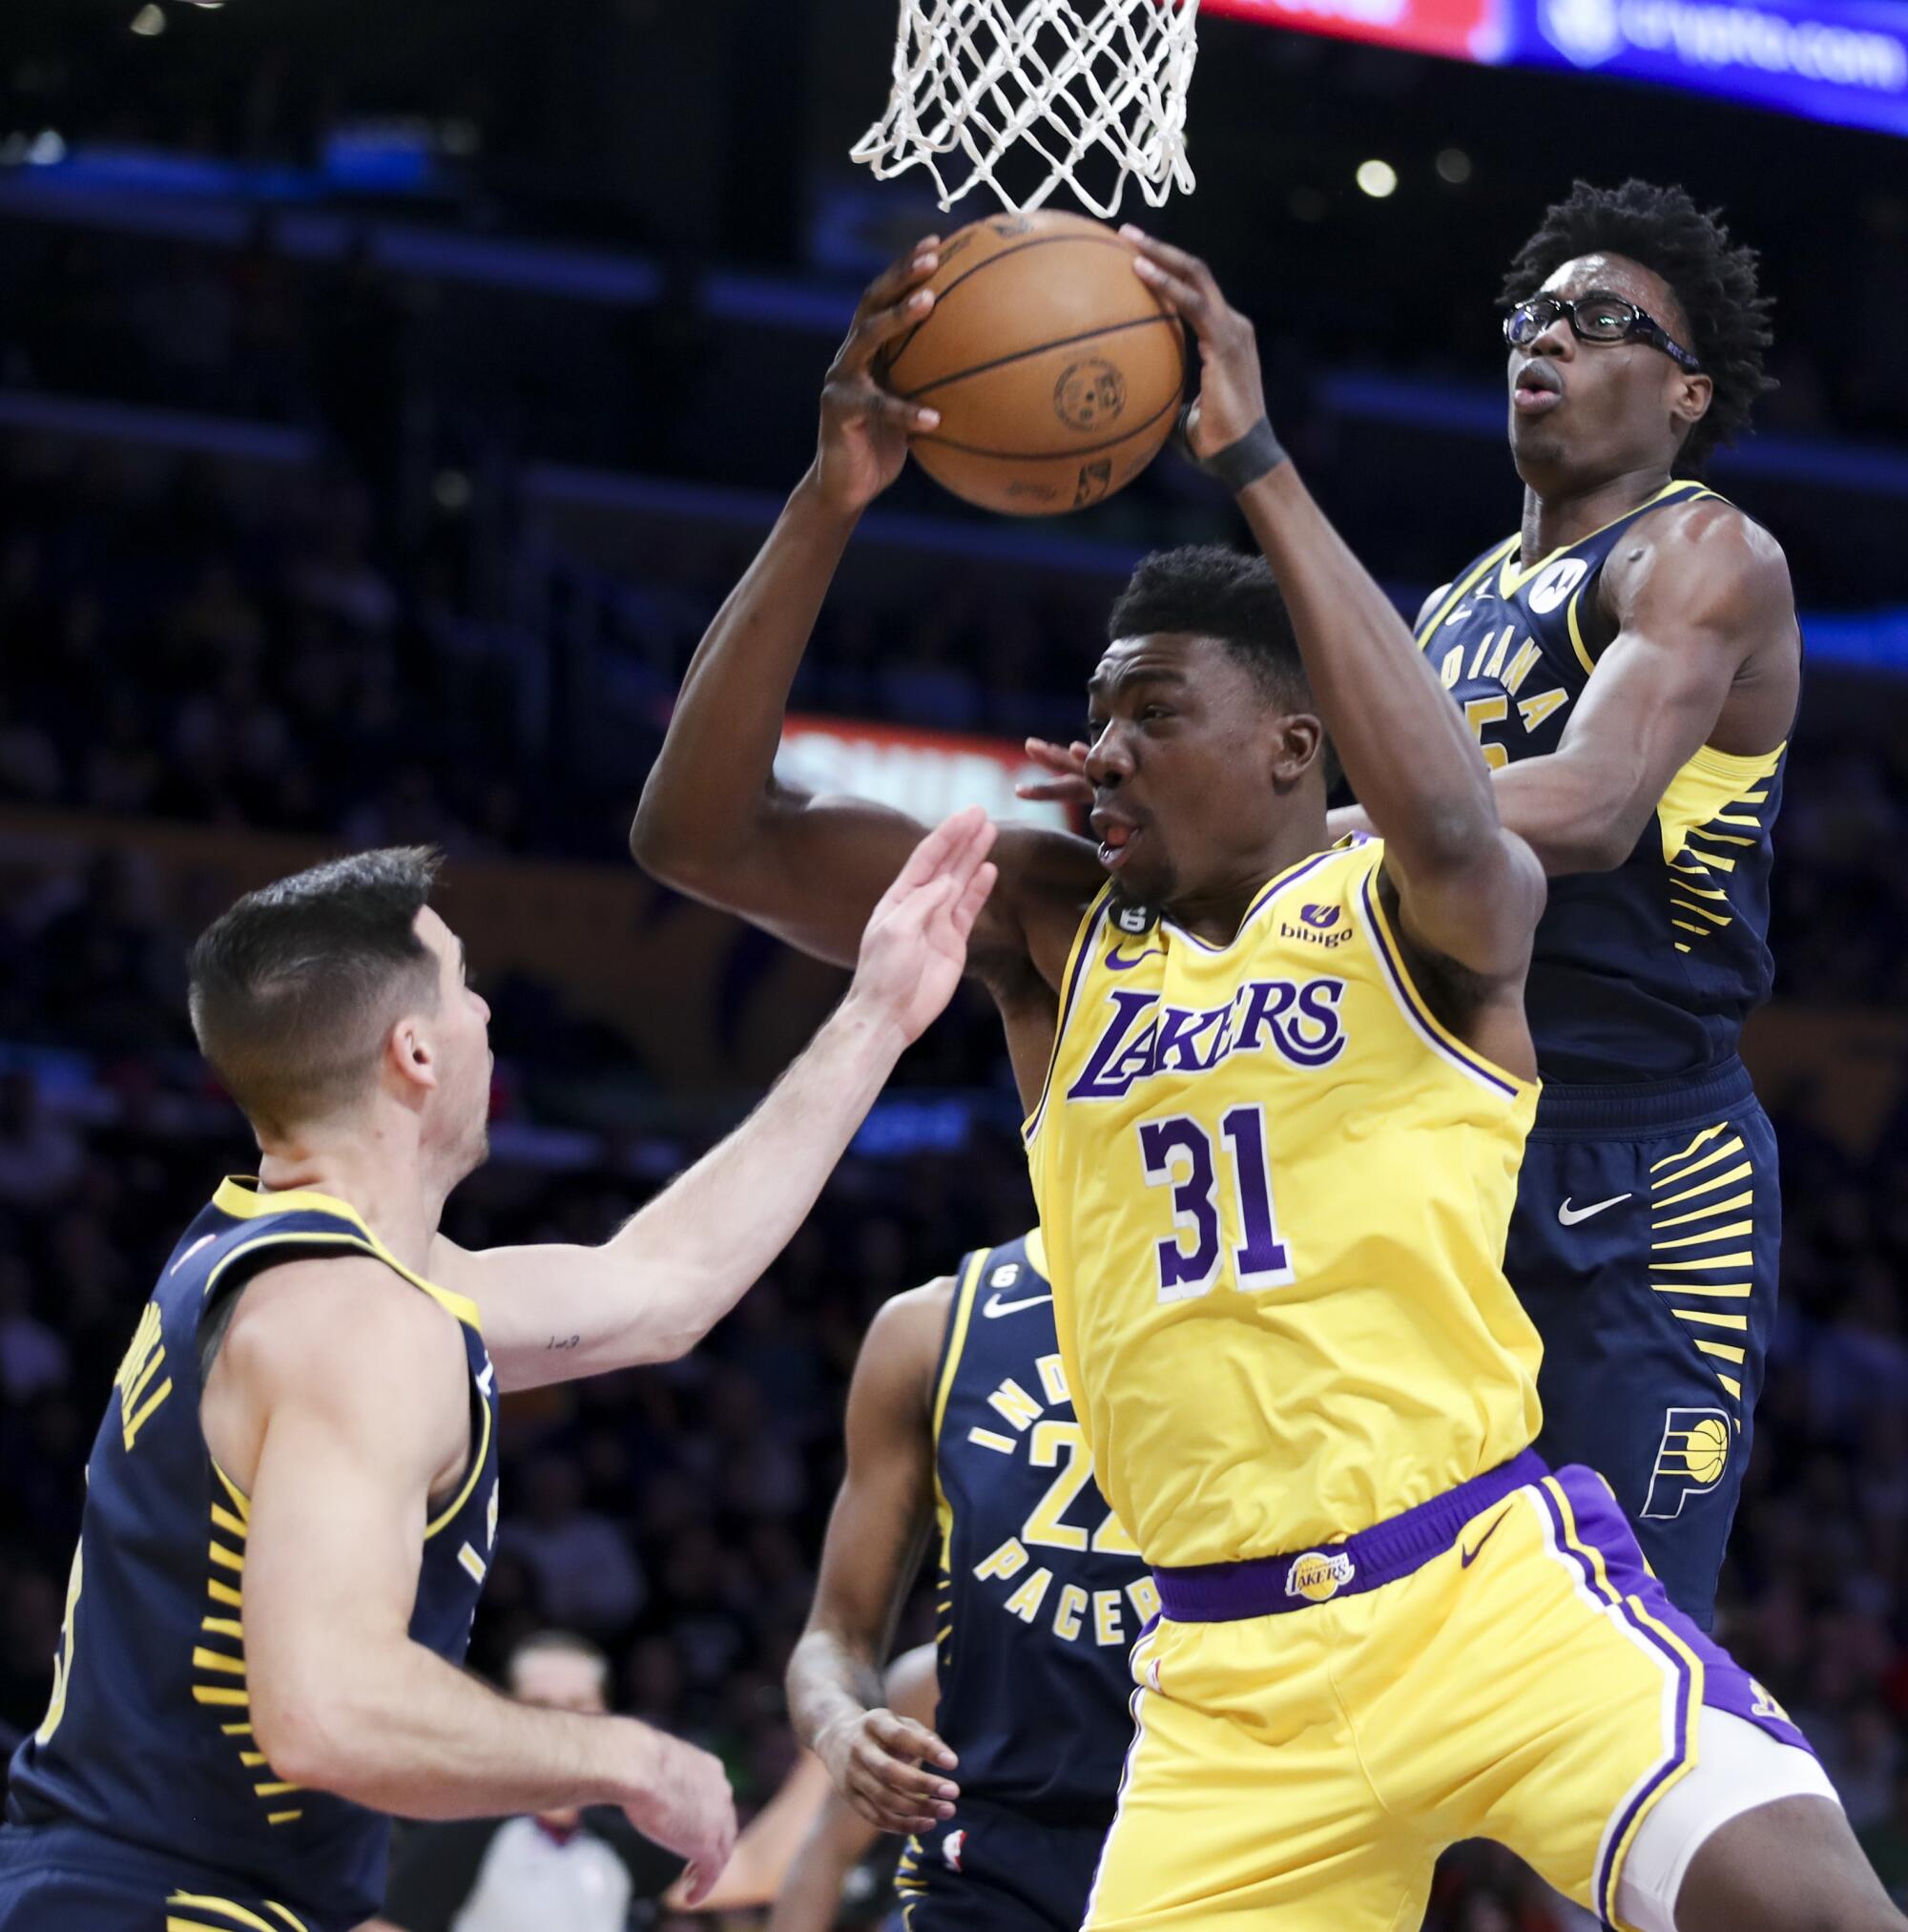 Thomas Bryant providing the spark and boost Lakers need - Los